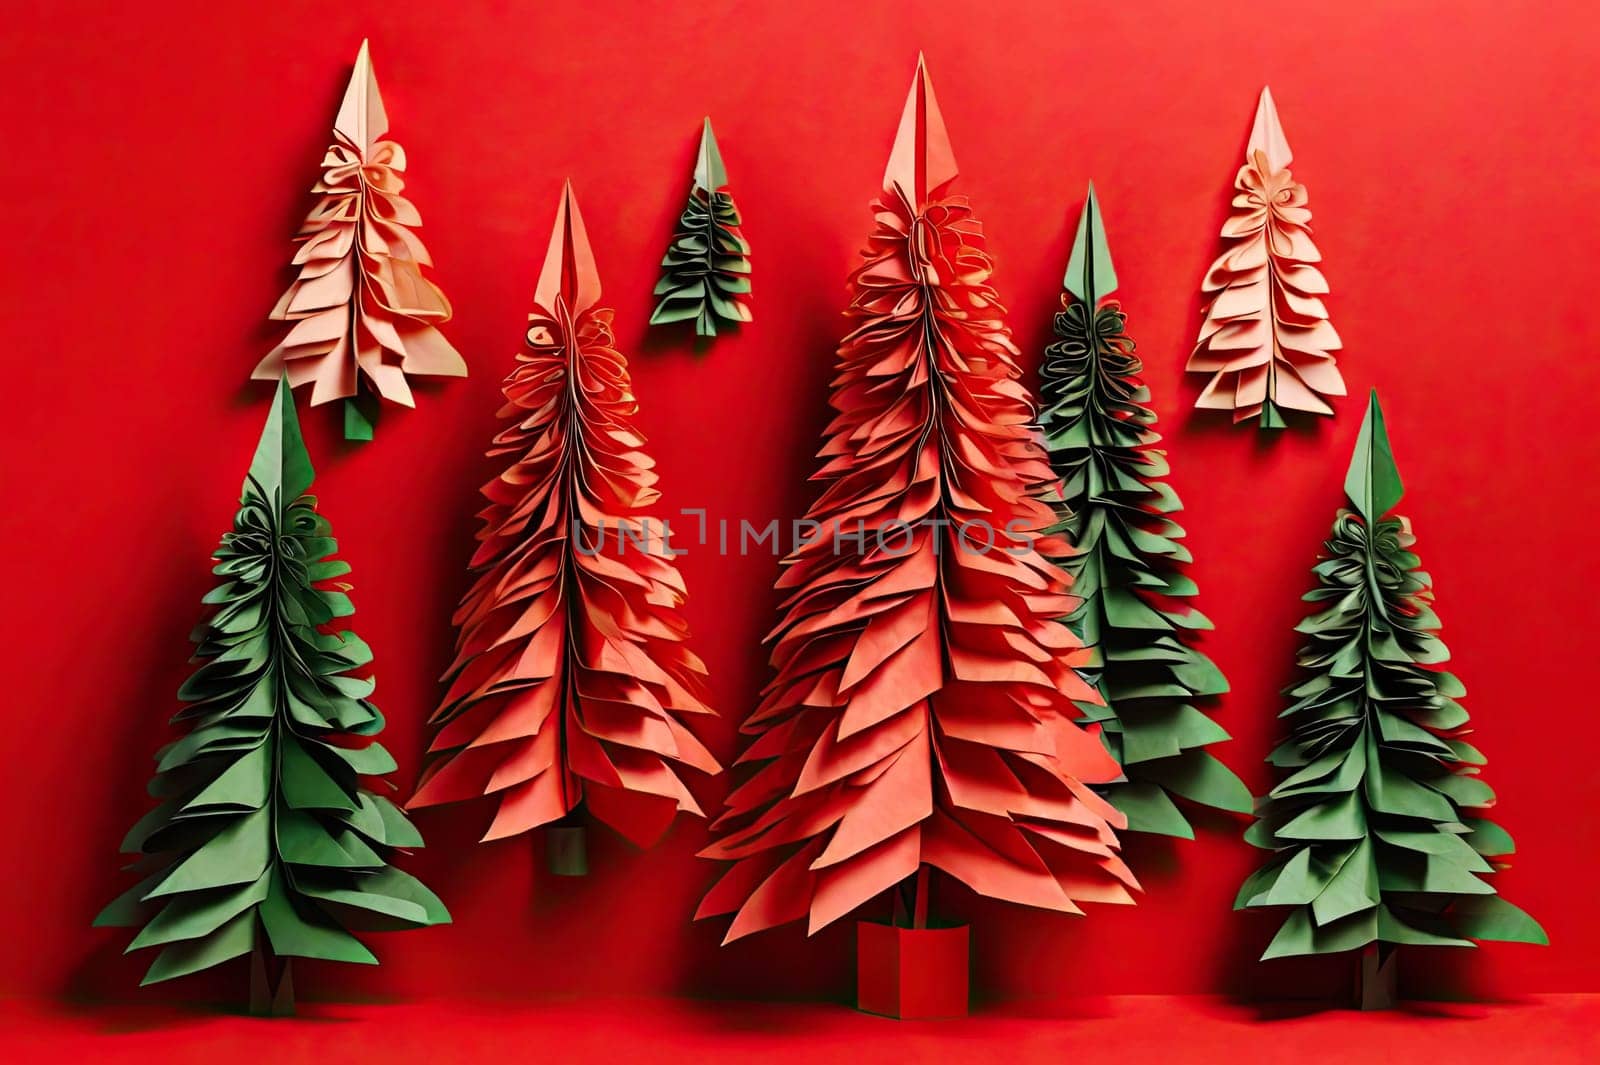  Christmas trees made of handmade paper.  by Ladouski